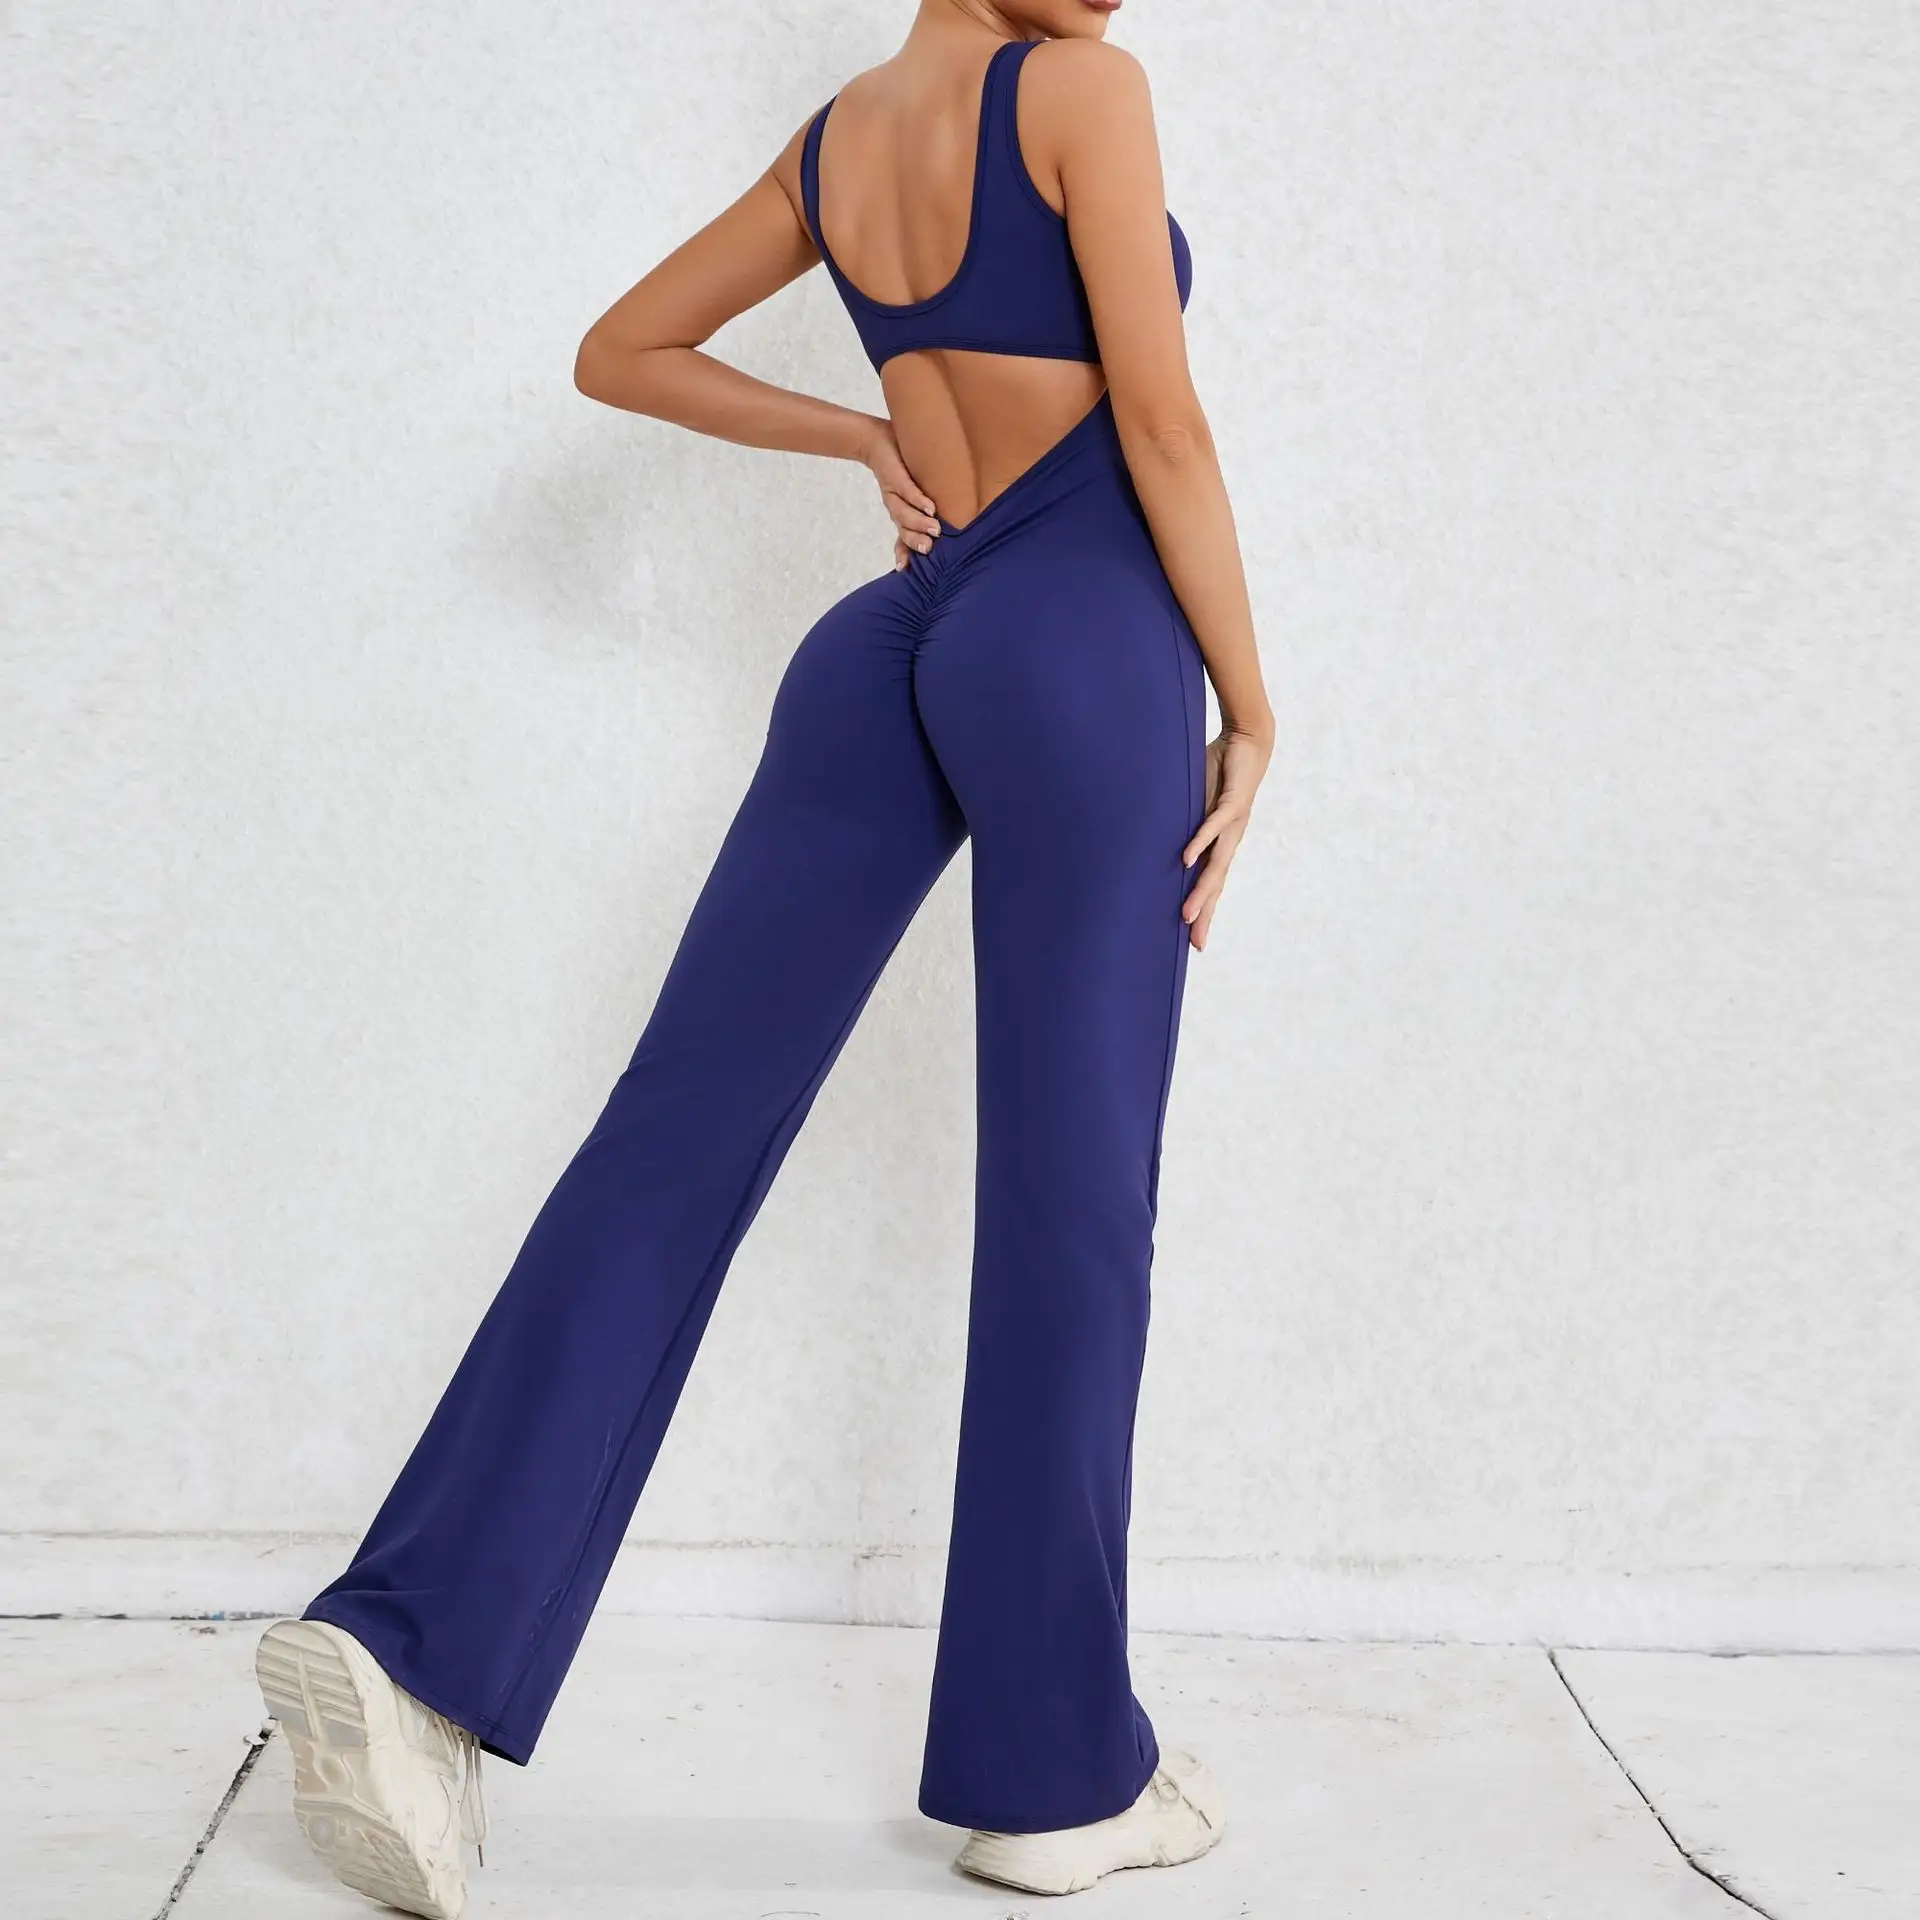 Full Length Scrunch Butt One Piece Flare Yoga Workout Jumpsuit for Women